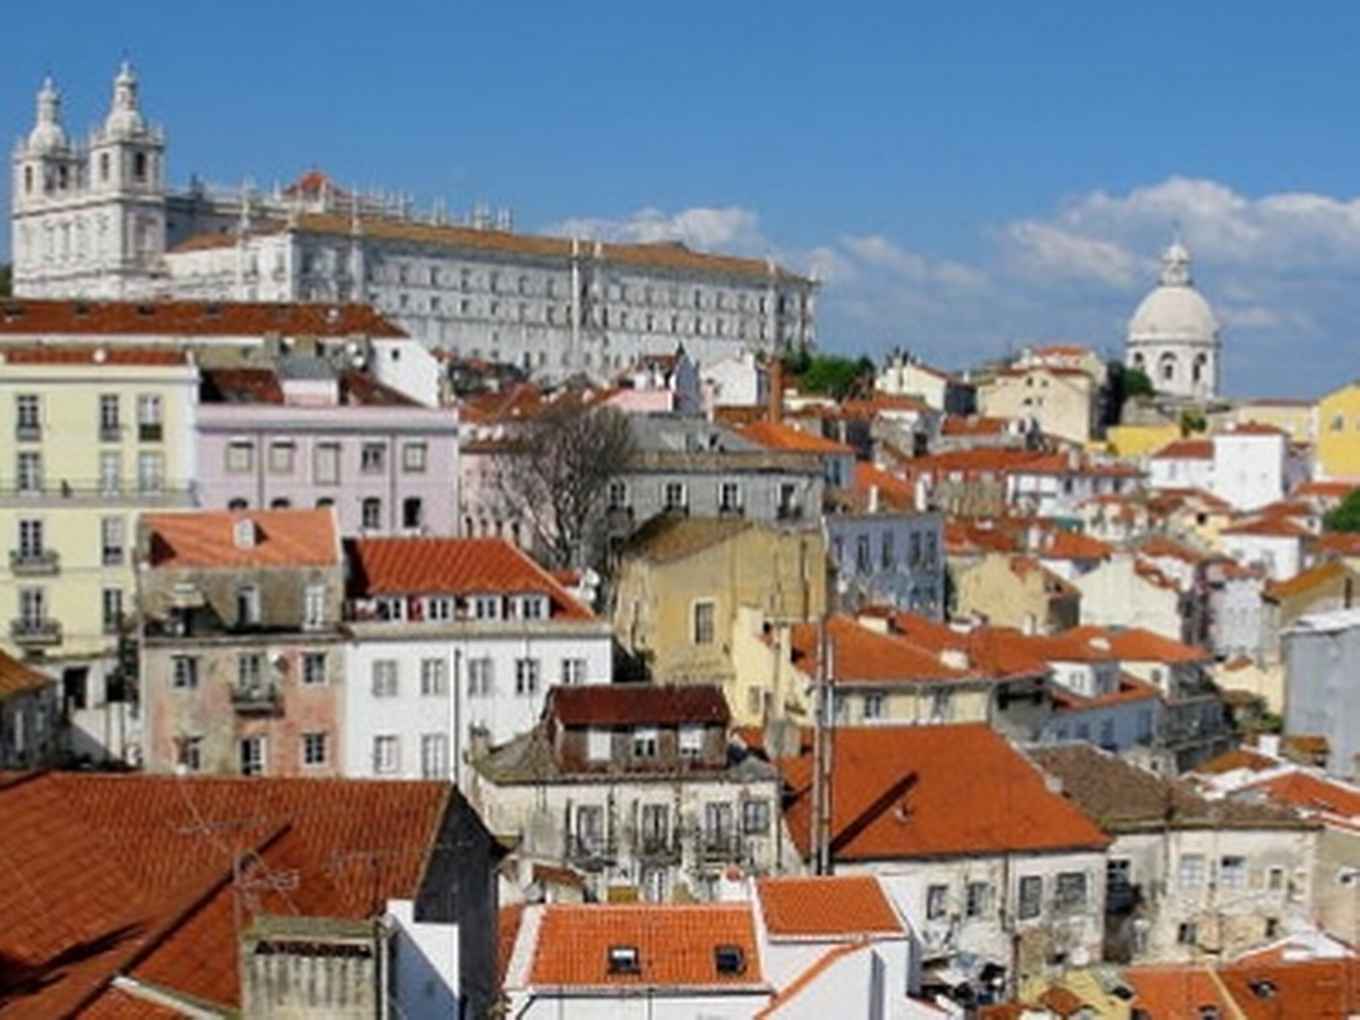 View in Lisboa, Portugal